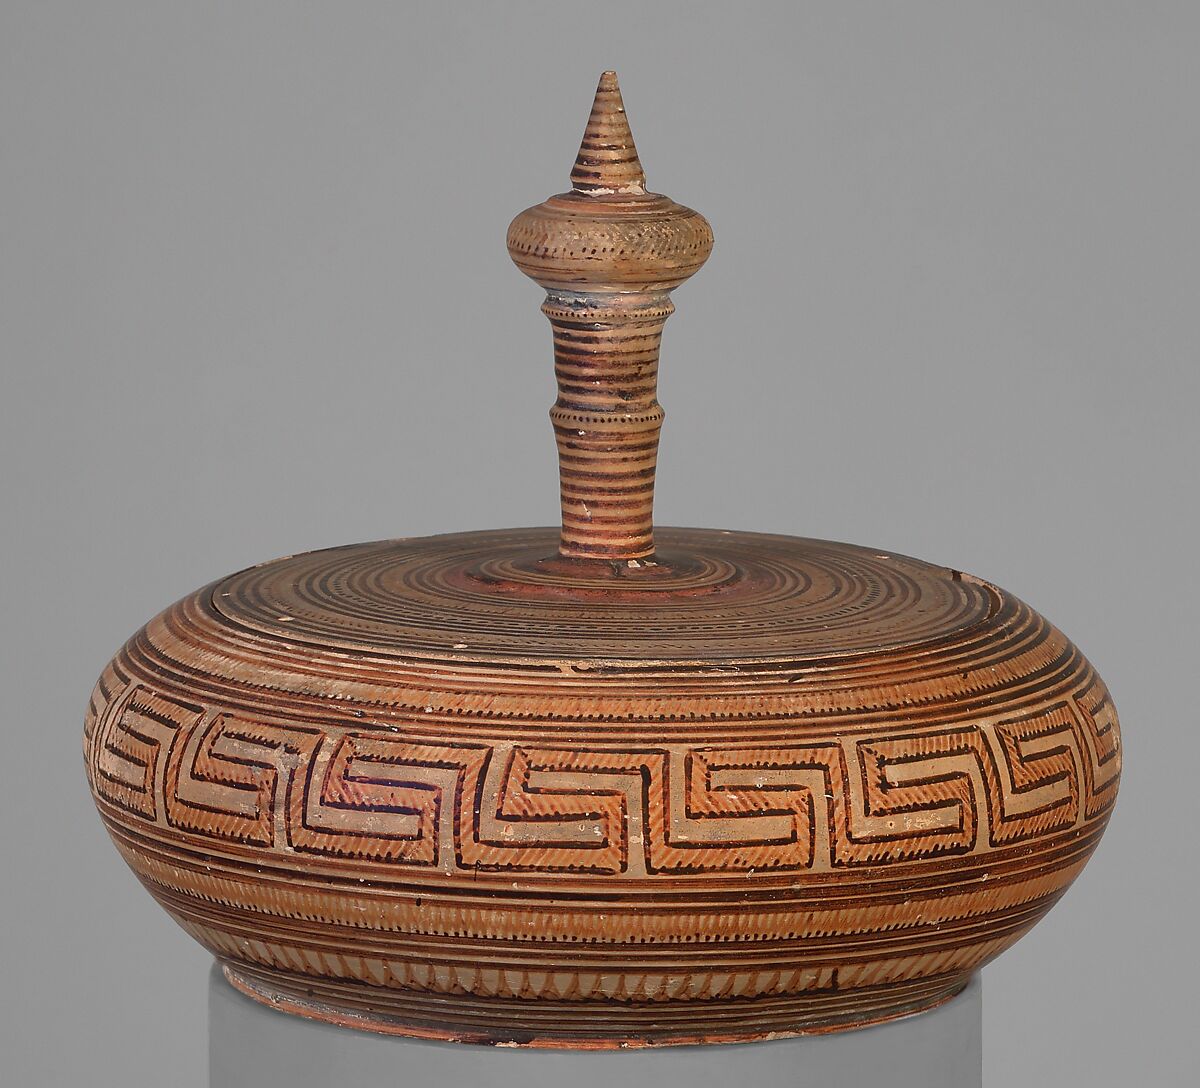 Terracotta pyxis (box with lid)